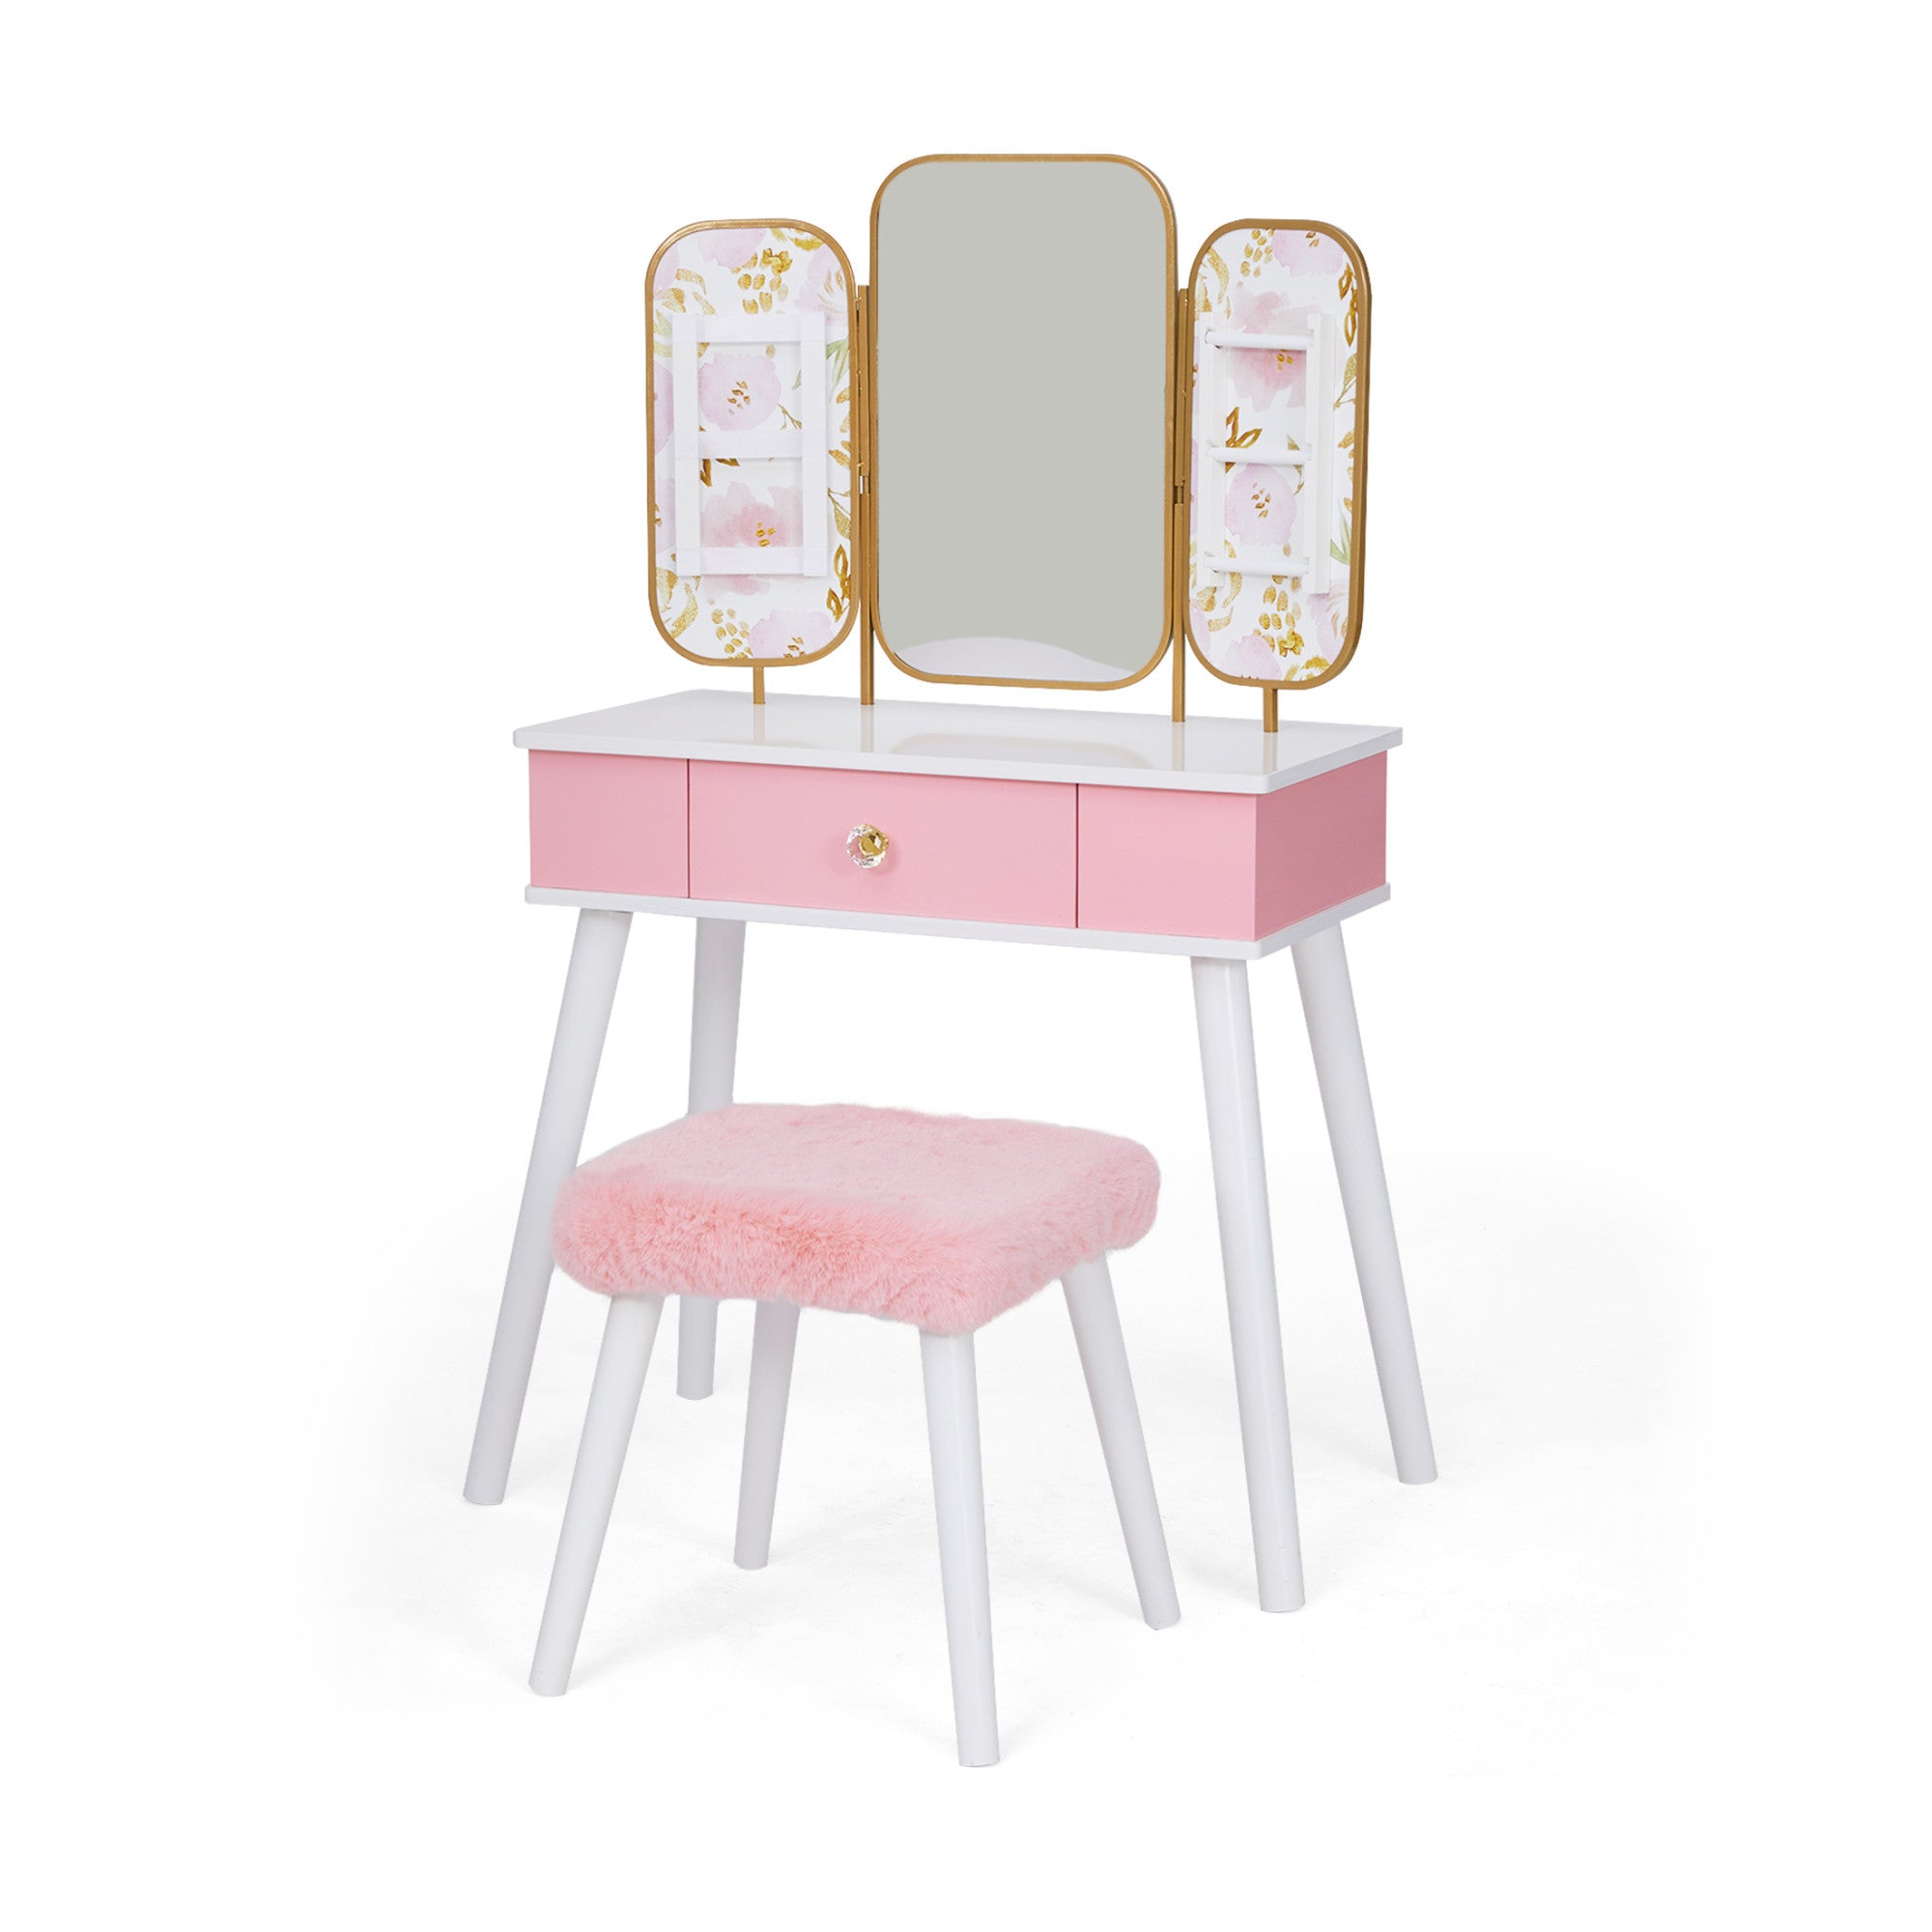 Fantasy Fields Little Lady Izabel Medium Floral Play Vanity Set with Matching Stool & Removable Faux Fur Cover, Floral Printed Panels, & Storage Drawer, White/Pink